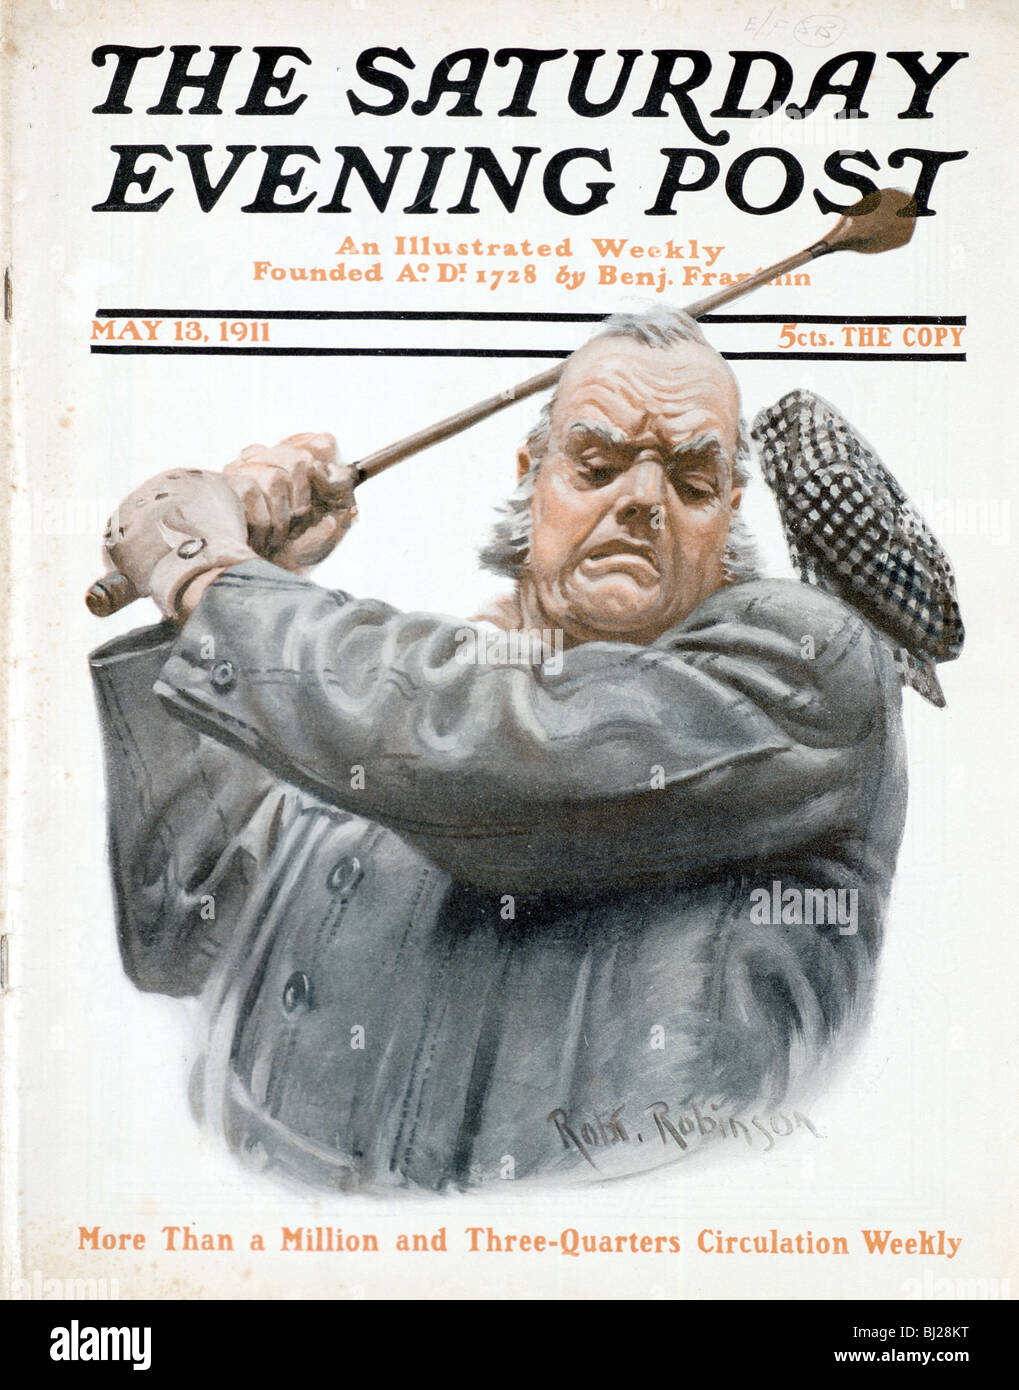 https://c8.alamy.com/comp/BJ28KT/cover-of-the-saturday-evening-post-may-1933-artist-unknown-BJ28KT.jpg